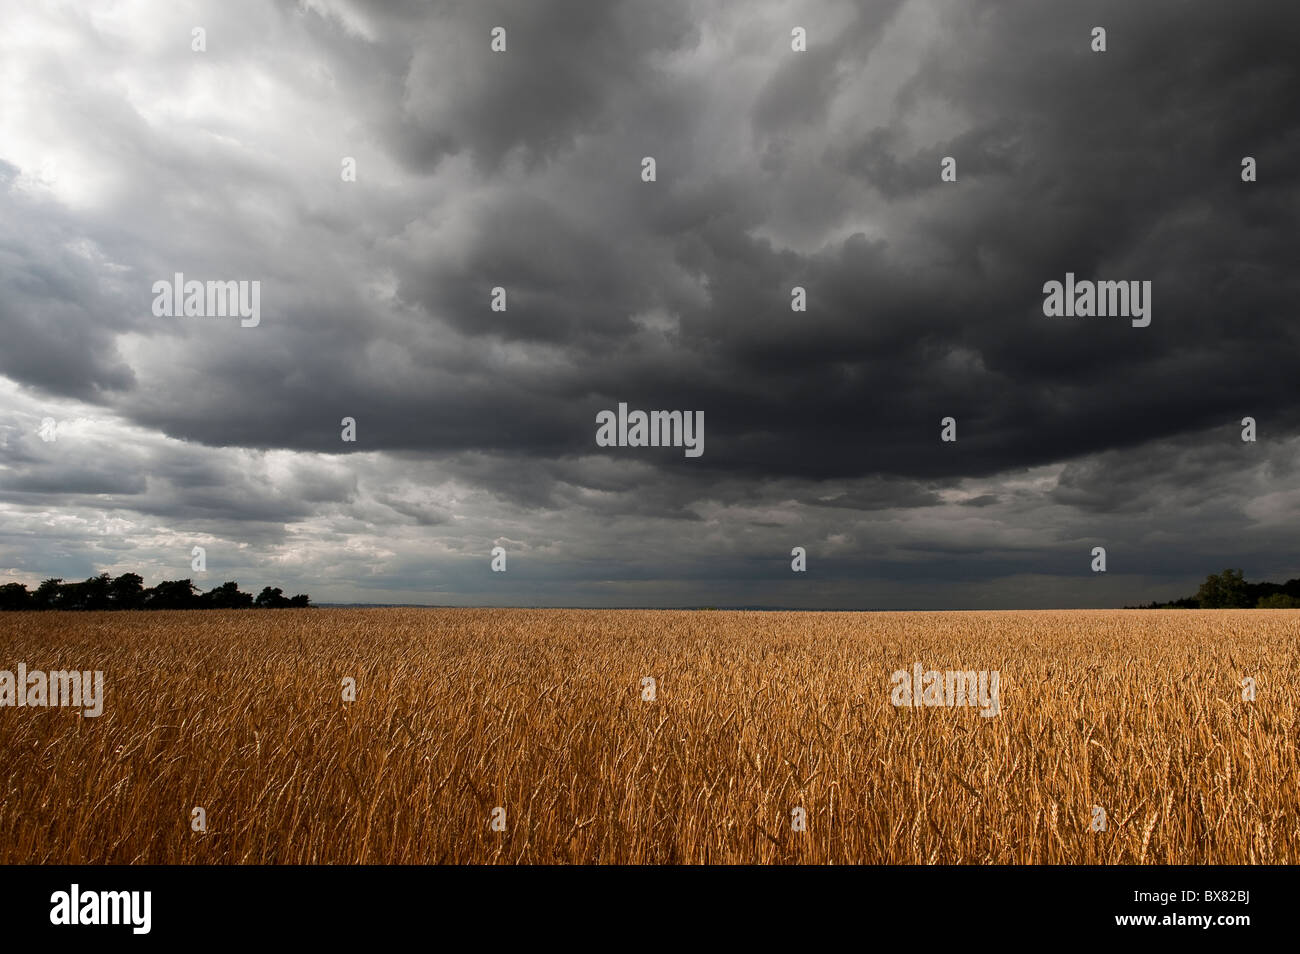 A beautiful isolated English wheat field lit by patches of sunlight with dark stormy skies overhead Stock Photo